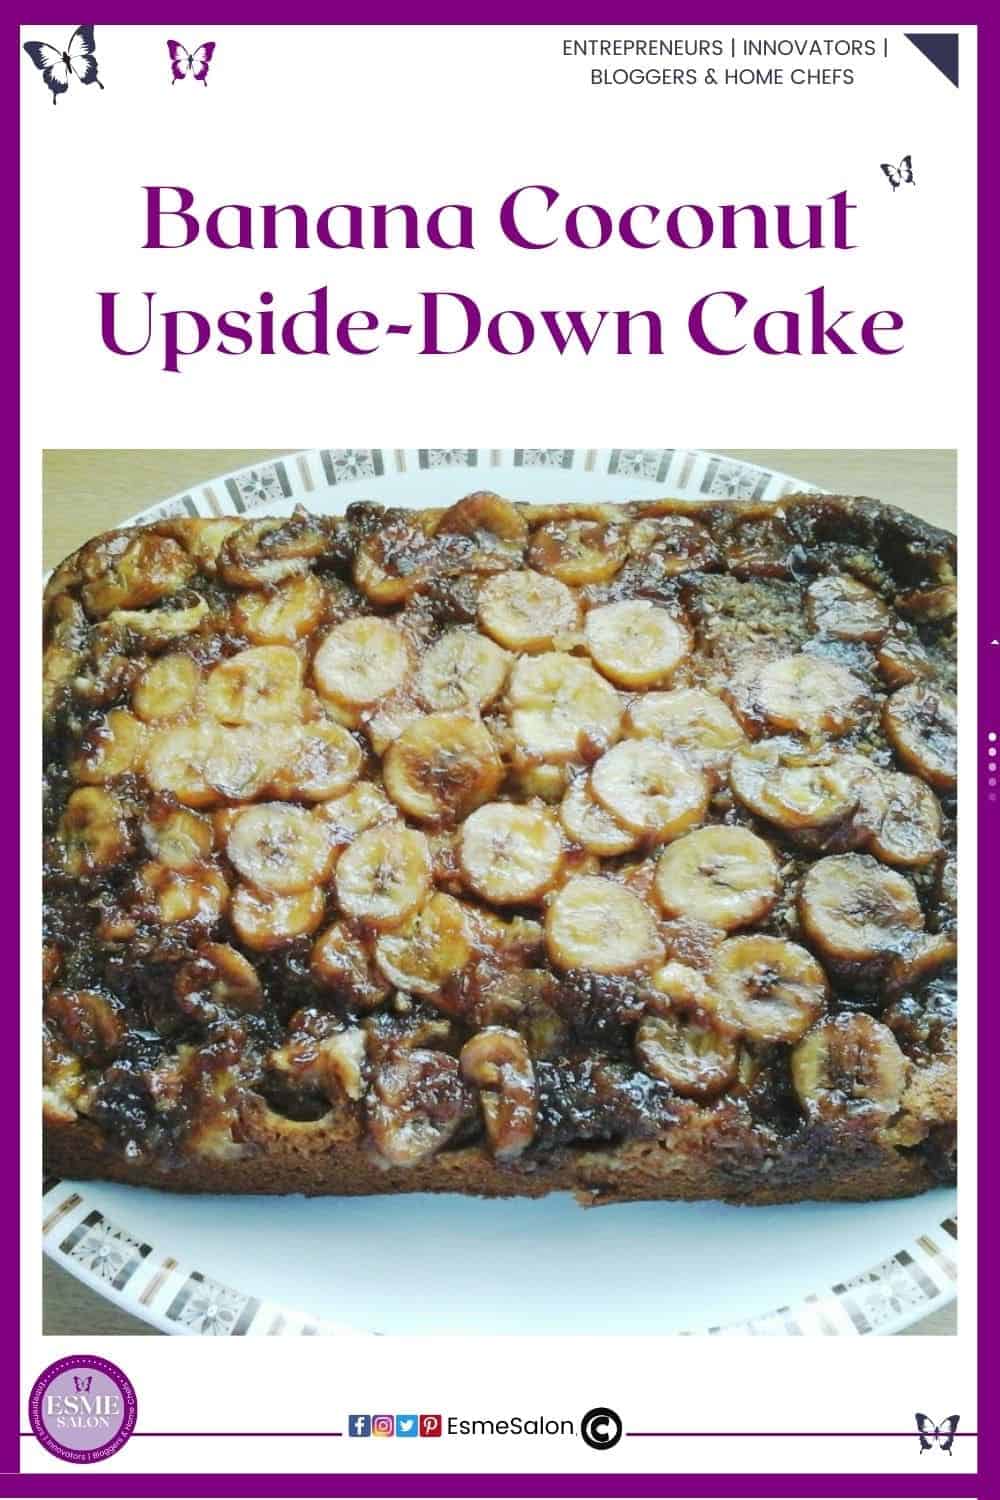 an image of an oblong Banana Coconut Upside-Down Cake with banana slices on the top